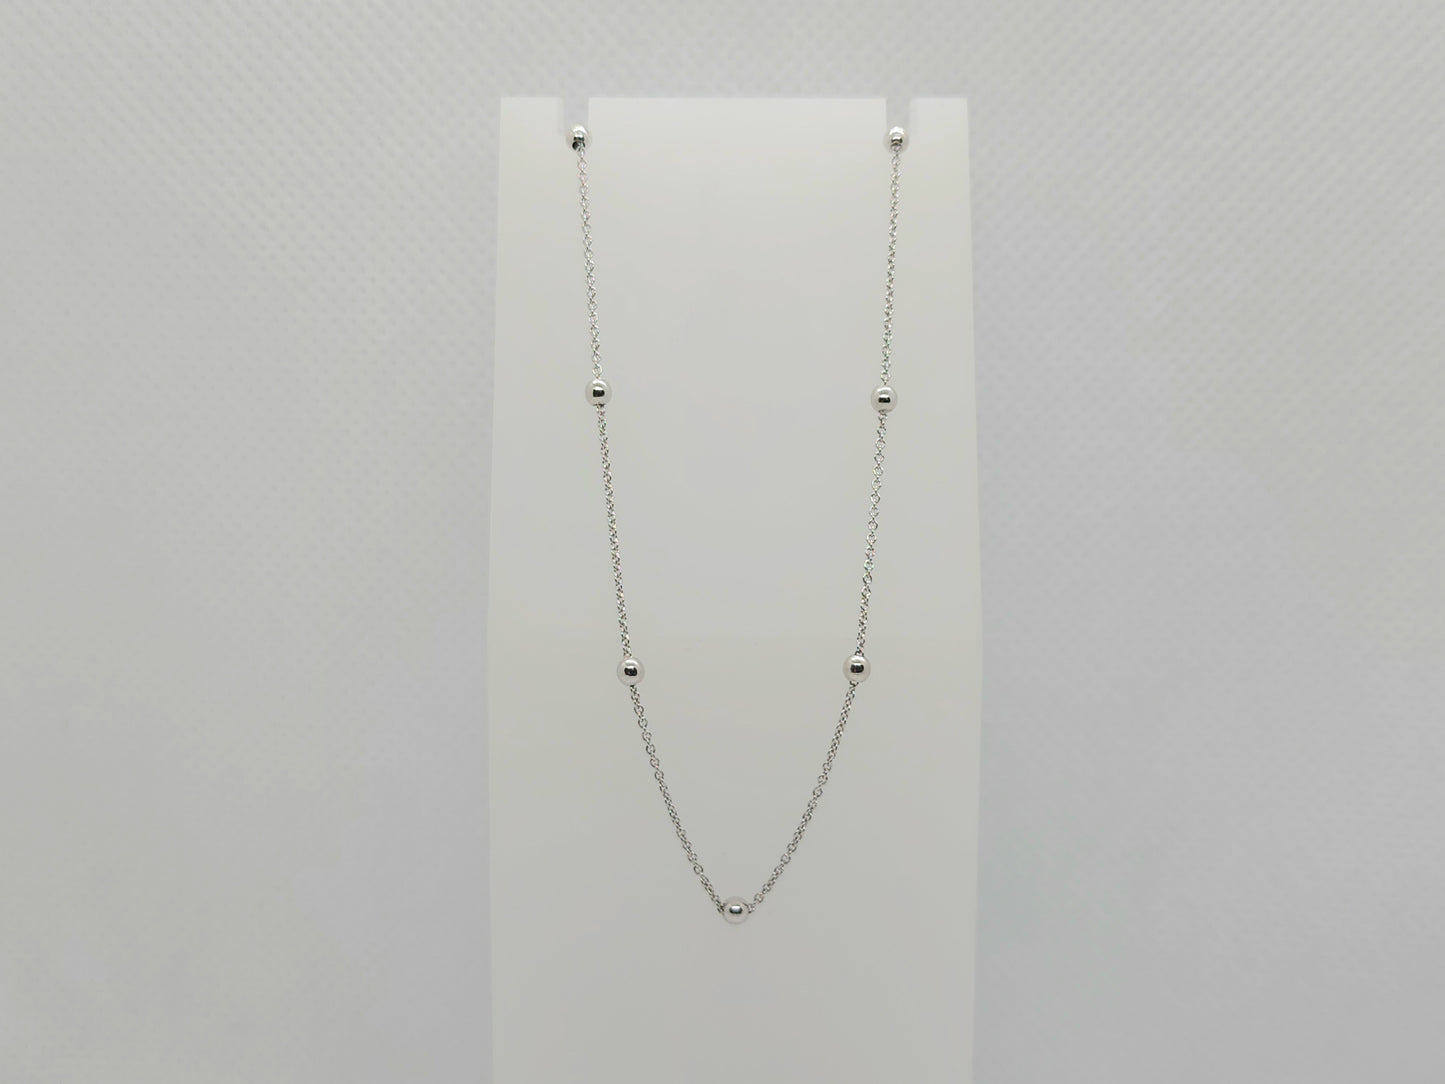 10k white gold beads and cable chain 18142